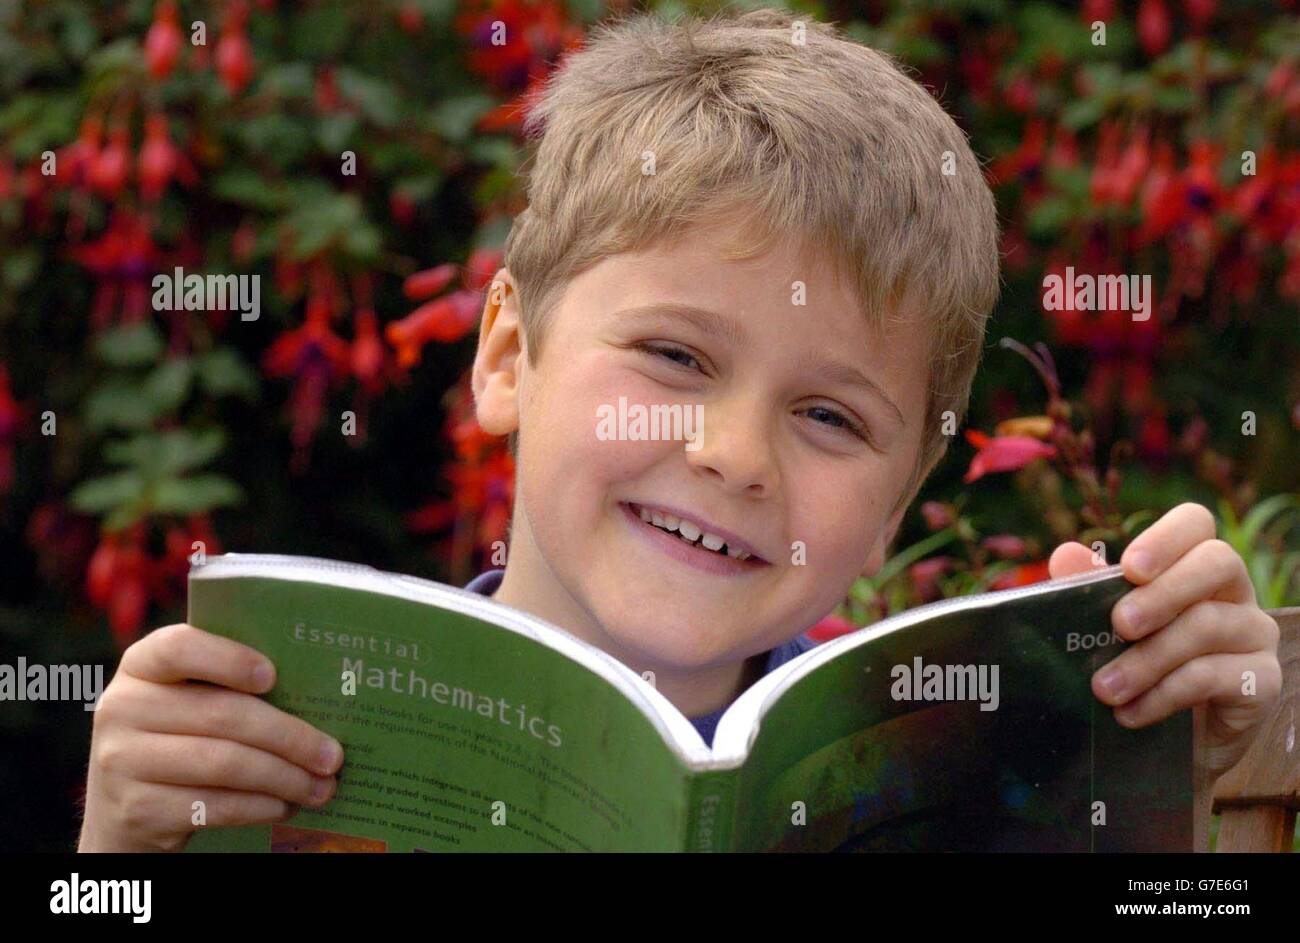 Morgan Kennedy, 9, at home in Martham, Norfolk. Morgan who is dyslexic astounded his parents and teachers when the results of a spelling test showed he has an IQ of 127, which puts him in the top 4% of adults and children for intelligence. Stock Photo